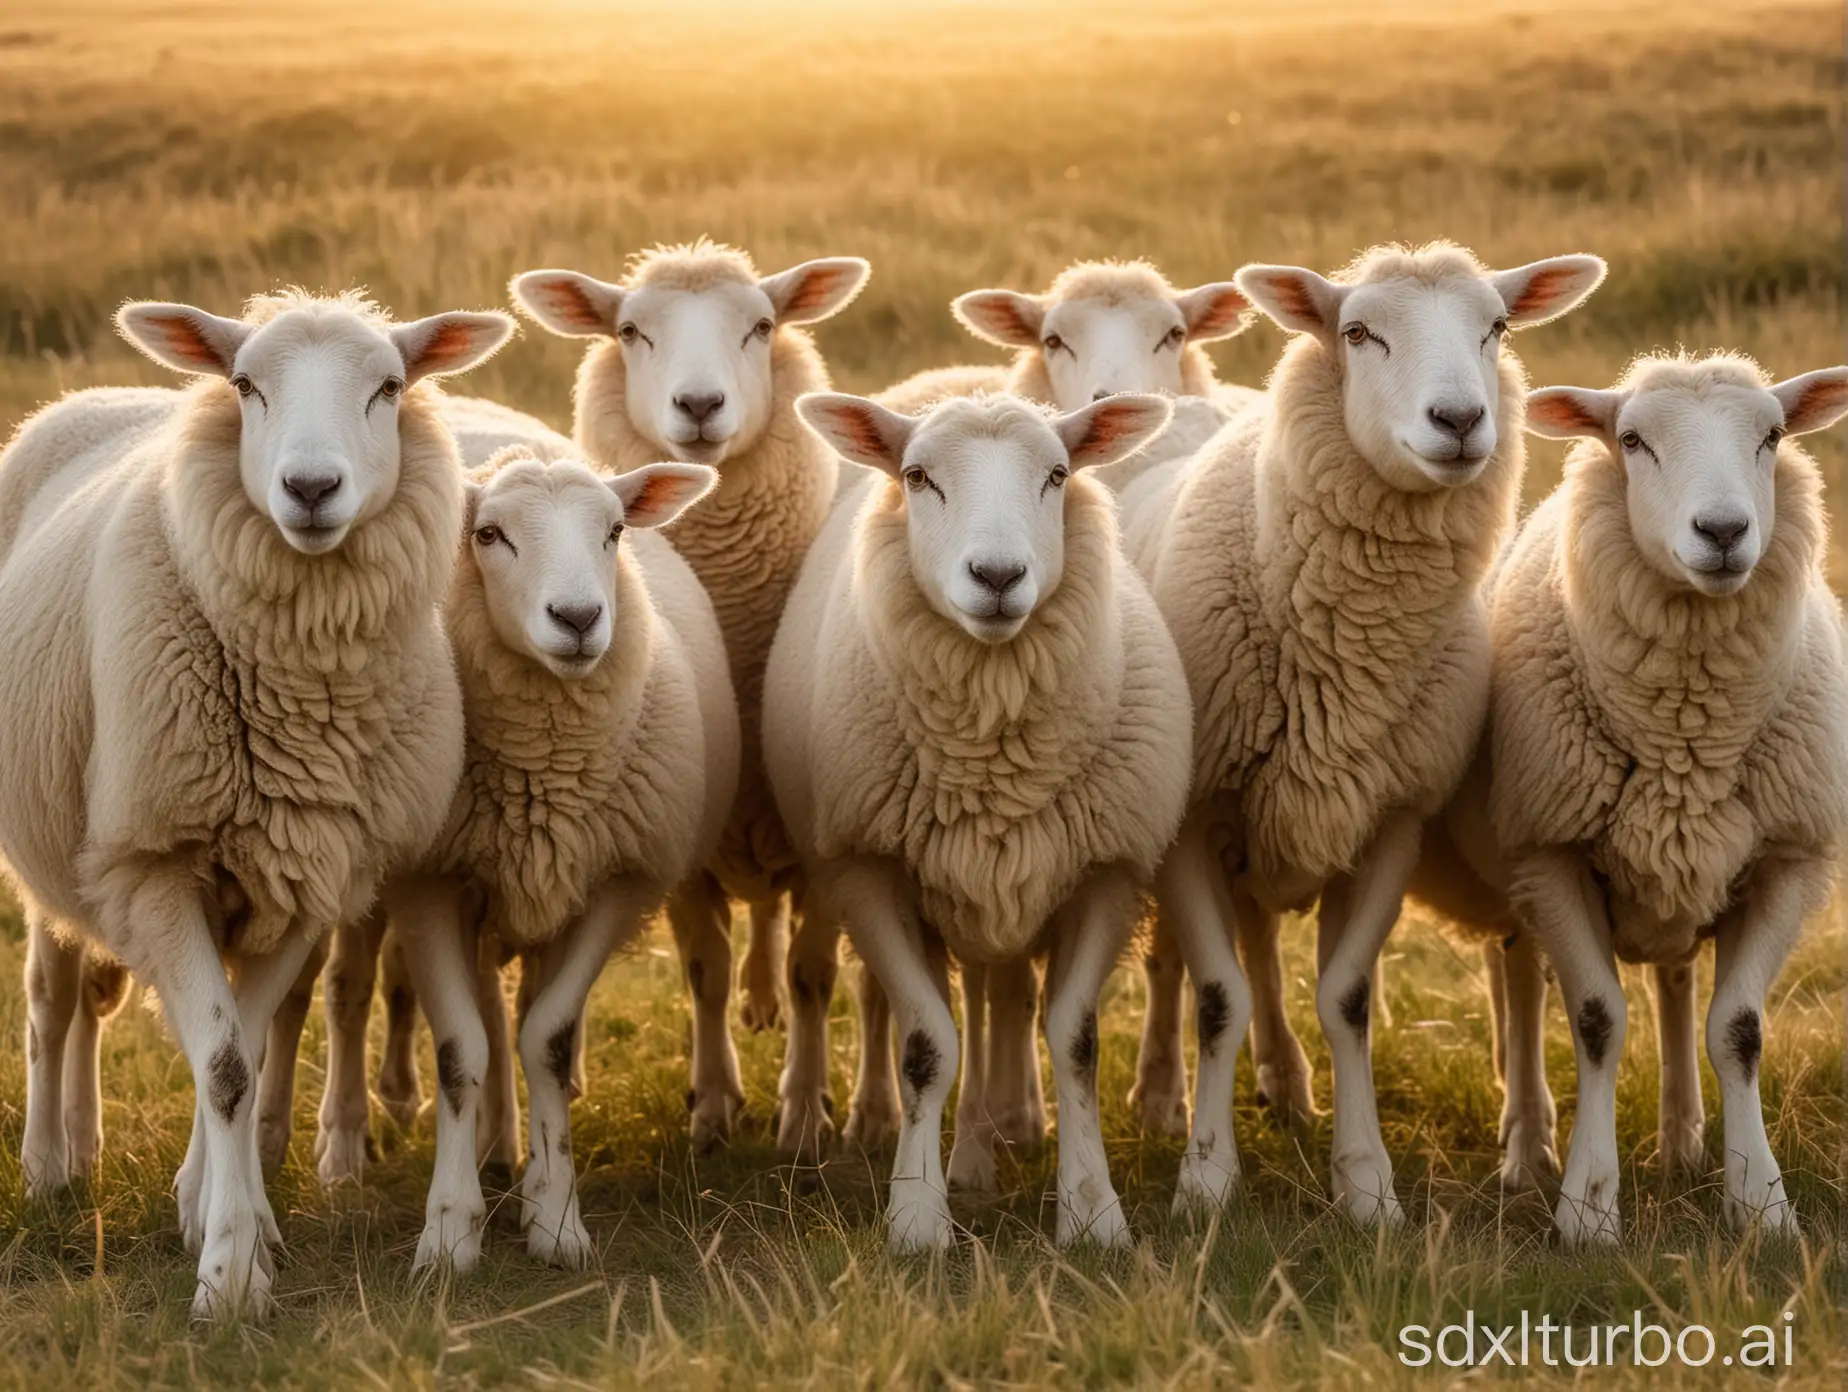 Symmetrical-Portrait-of-Eight-Colorful-Sheep-in-Golden-Hour-Grassland